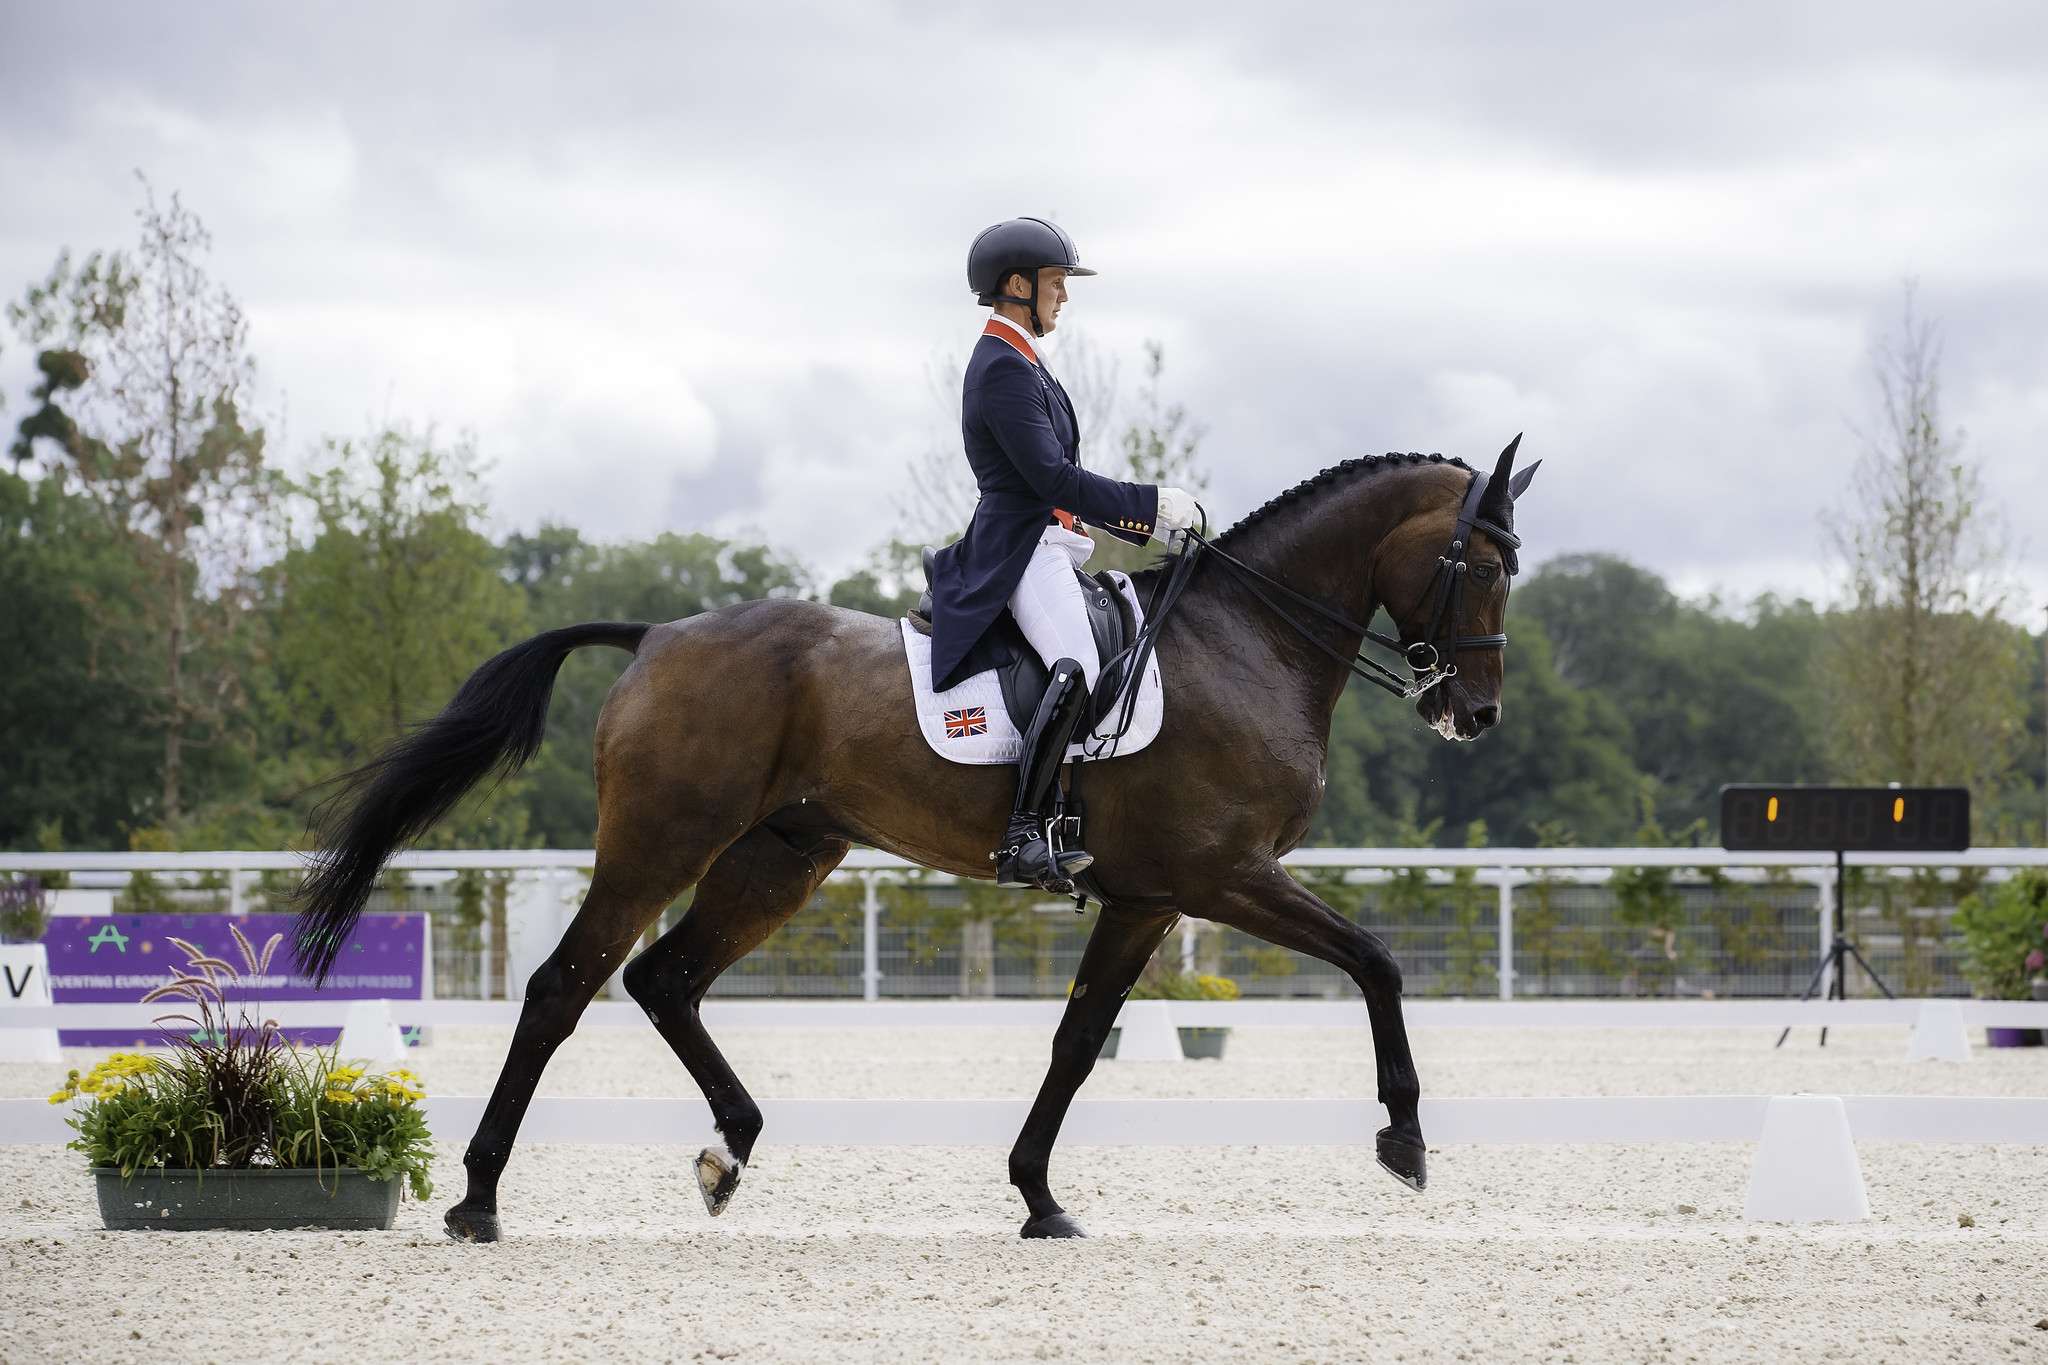 Tom McEwen rides JL Dublin during the second day of dressage. Interim-3rd. 2023 FRA-FEI Eventing European Championships | Haras du Pin, France. Friday 11 August 2023. Copyright Photo: FEI/Libby Law Photography